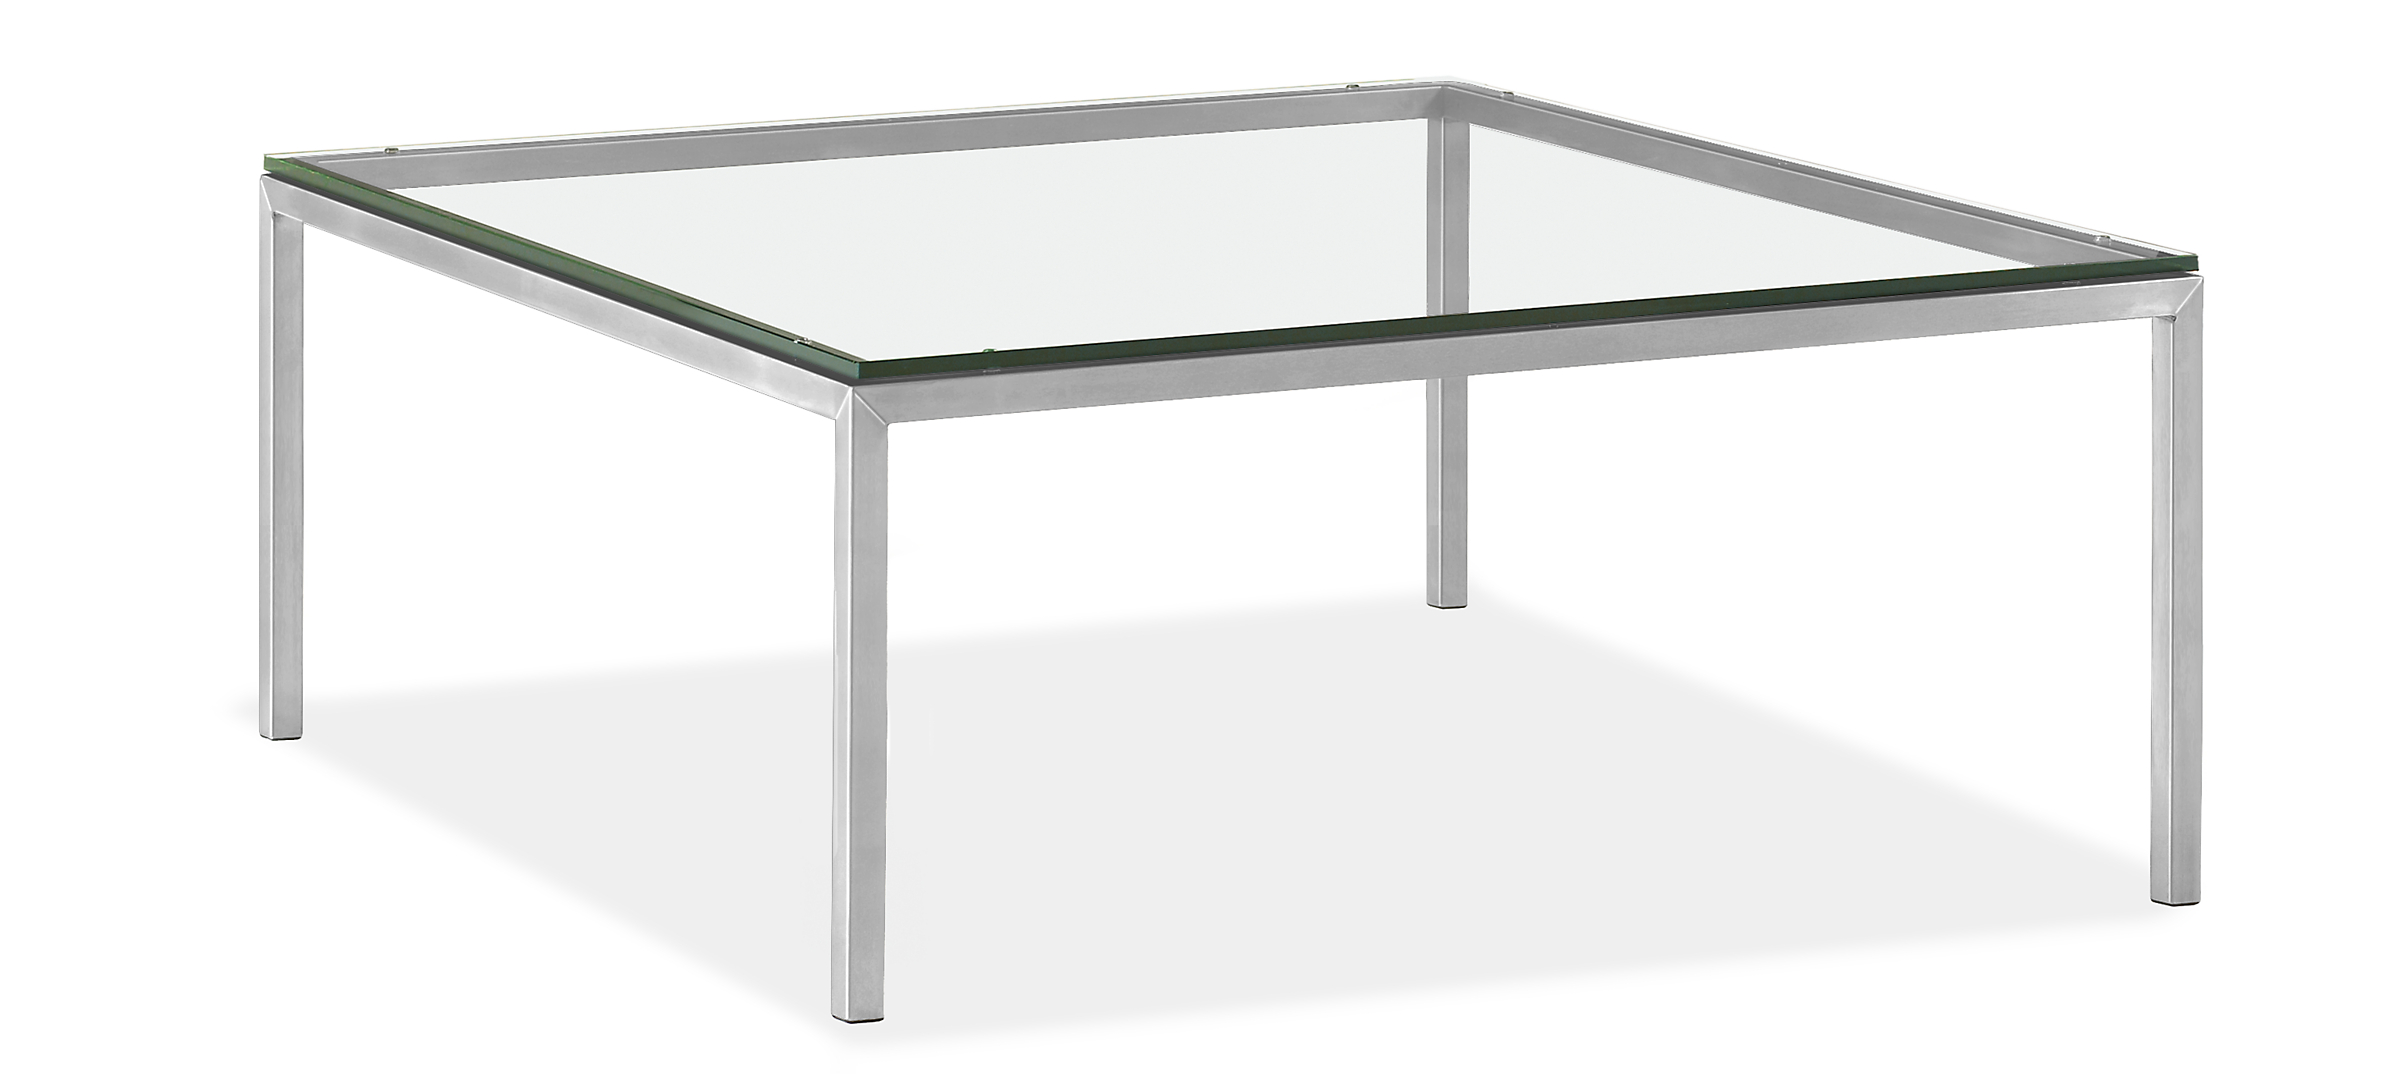 Parsons 36w 36d 16h Coffee Table with 1" Leg